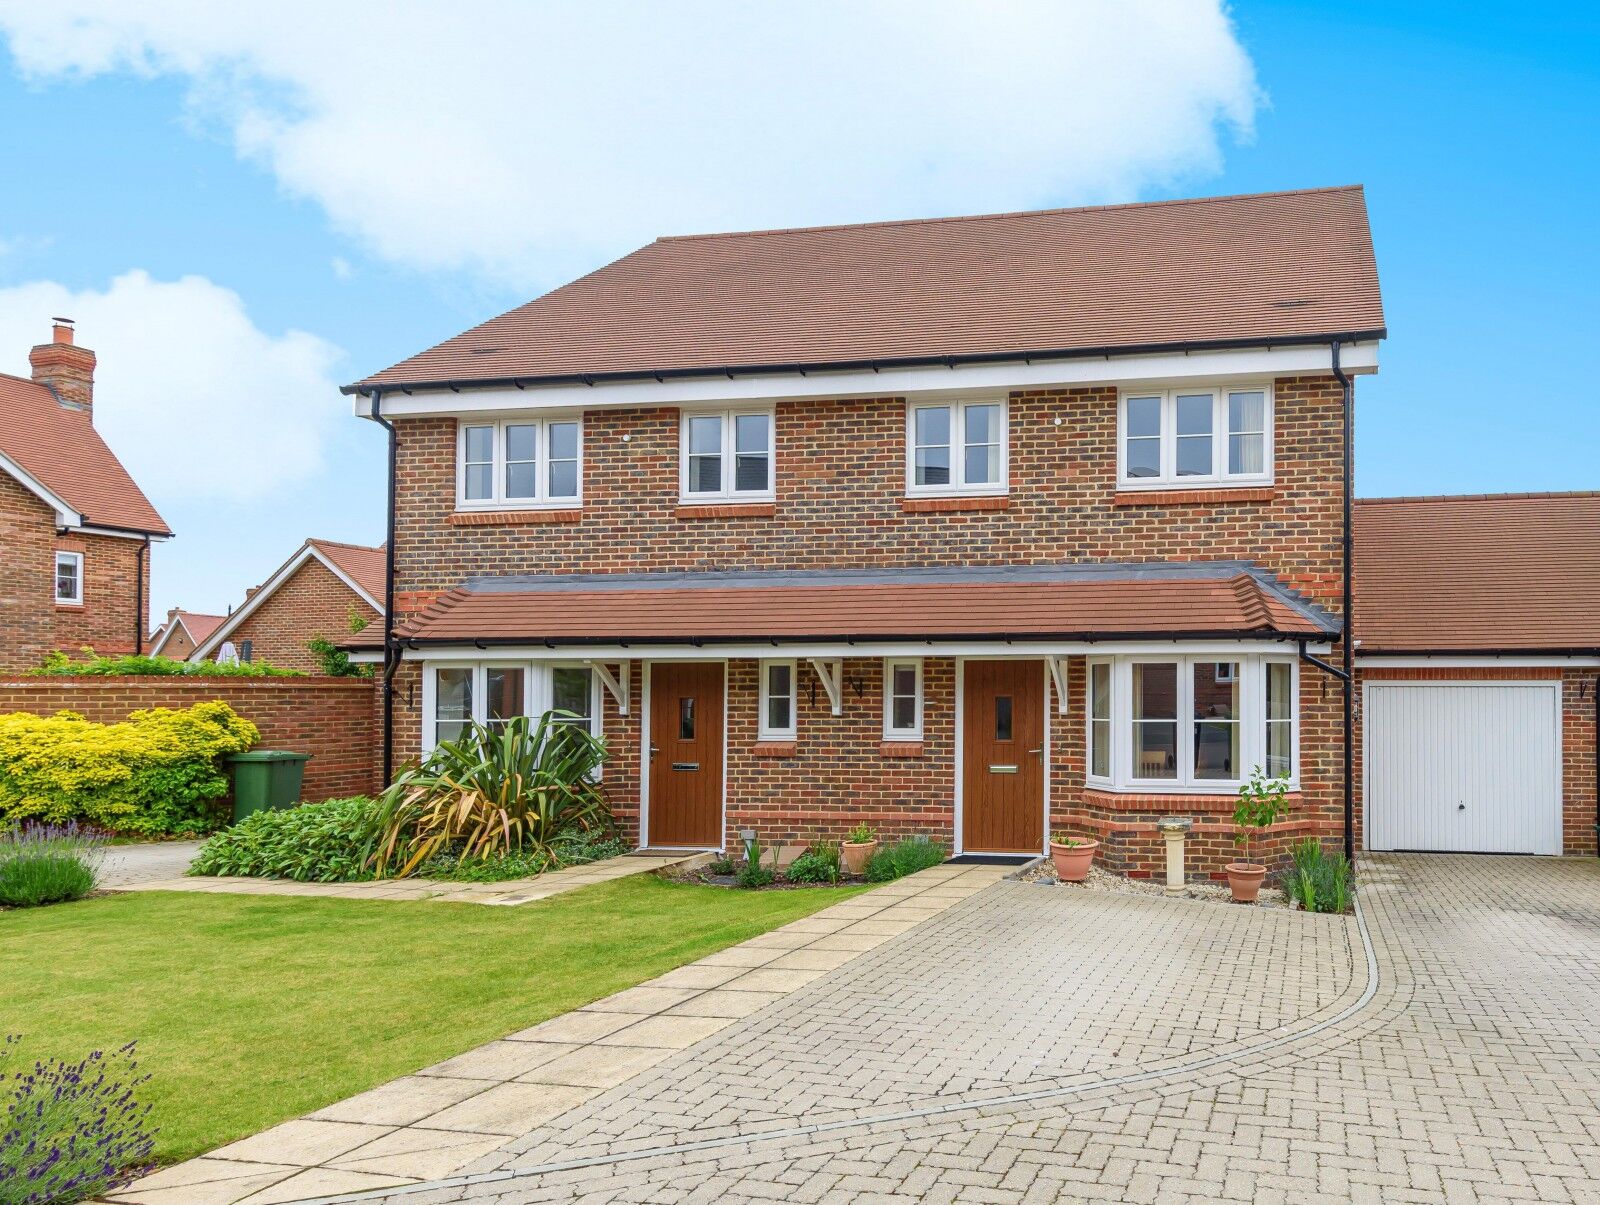 3 bedroom semi detached house for sale Bay Tree Rise, Sonning Common, RG4, main image